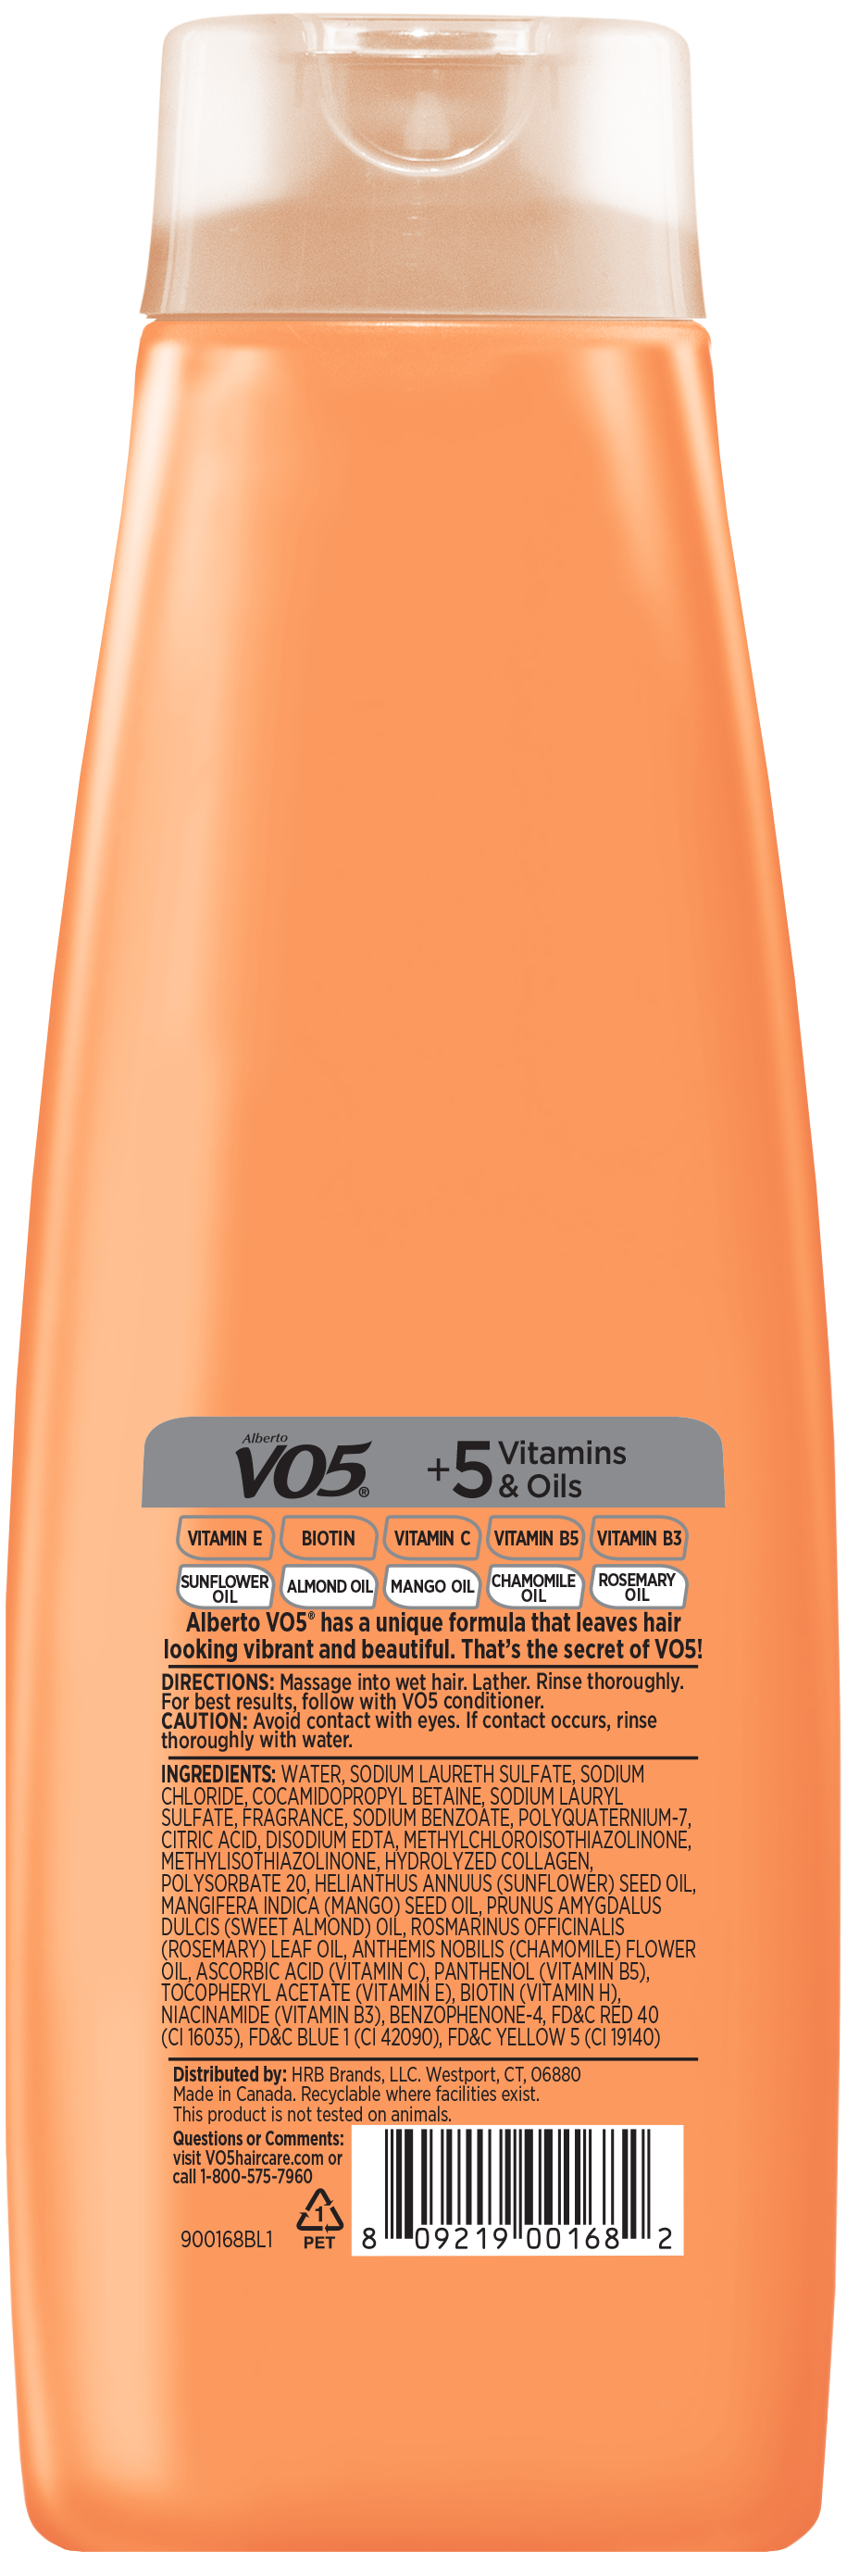 Alberto VO5 Extra Body Volumizing Shampoo with Collagen for All Hair Types, 16.9 oz - image 2 of 6